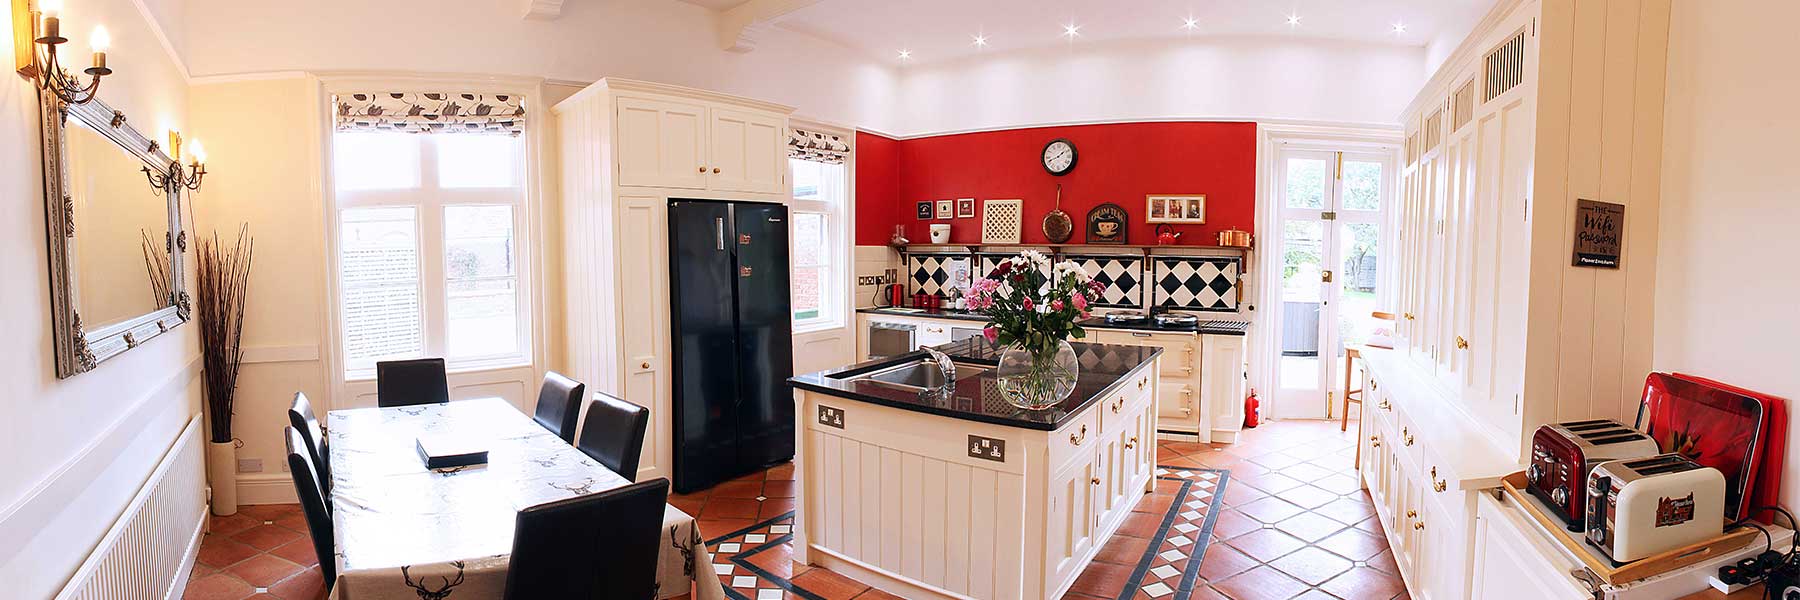 Large and Spacious Kitchen